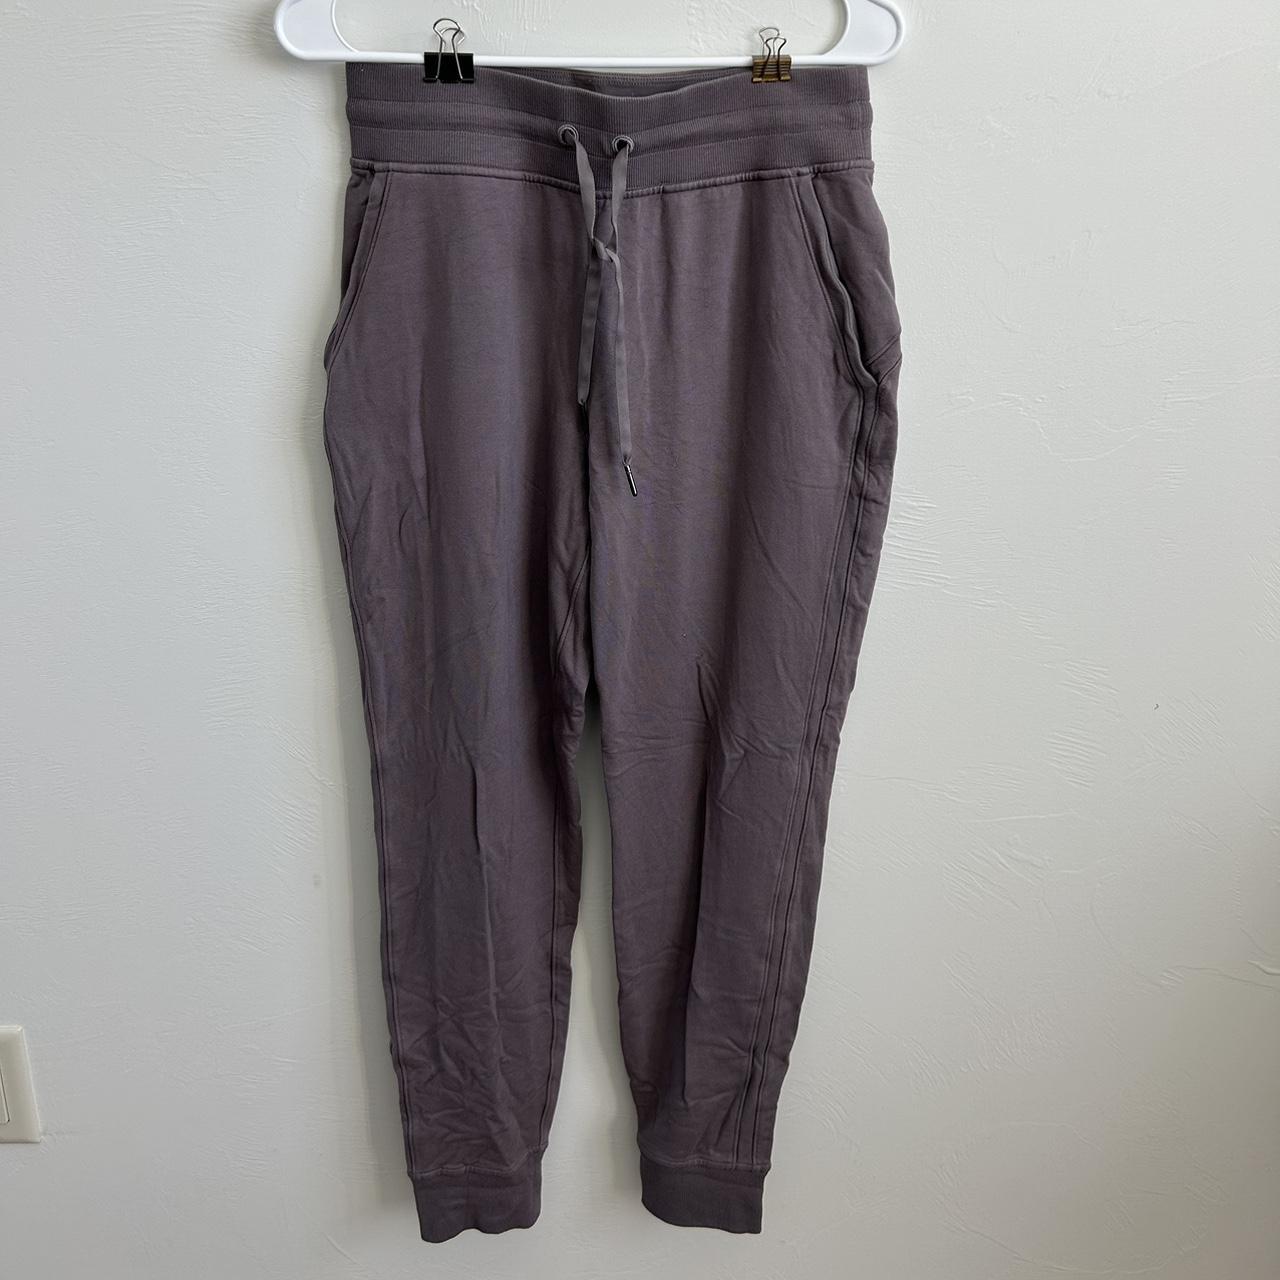 LULULEMON joggers size: 6 The tag is cut, but no - Depop